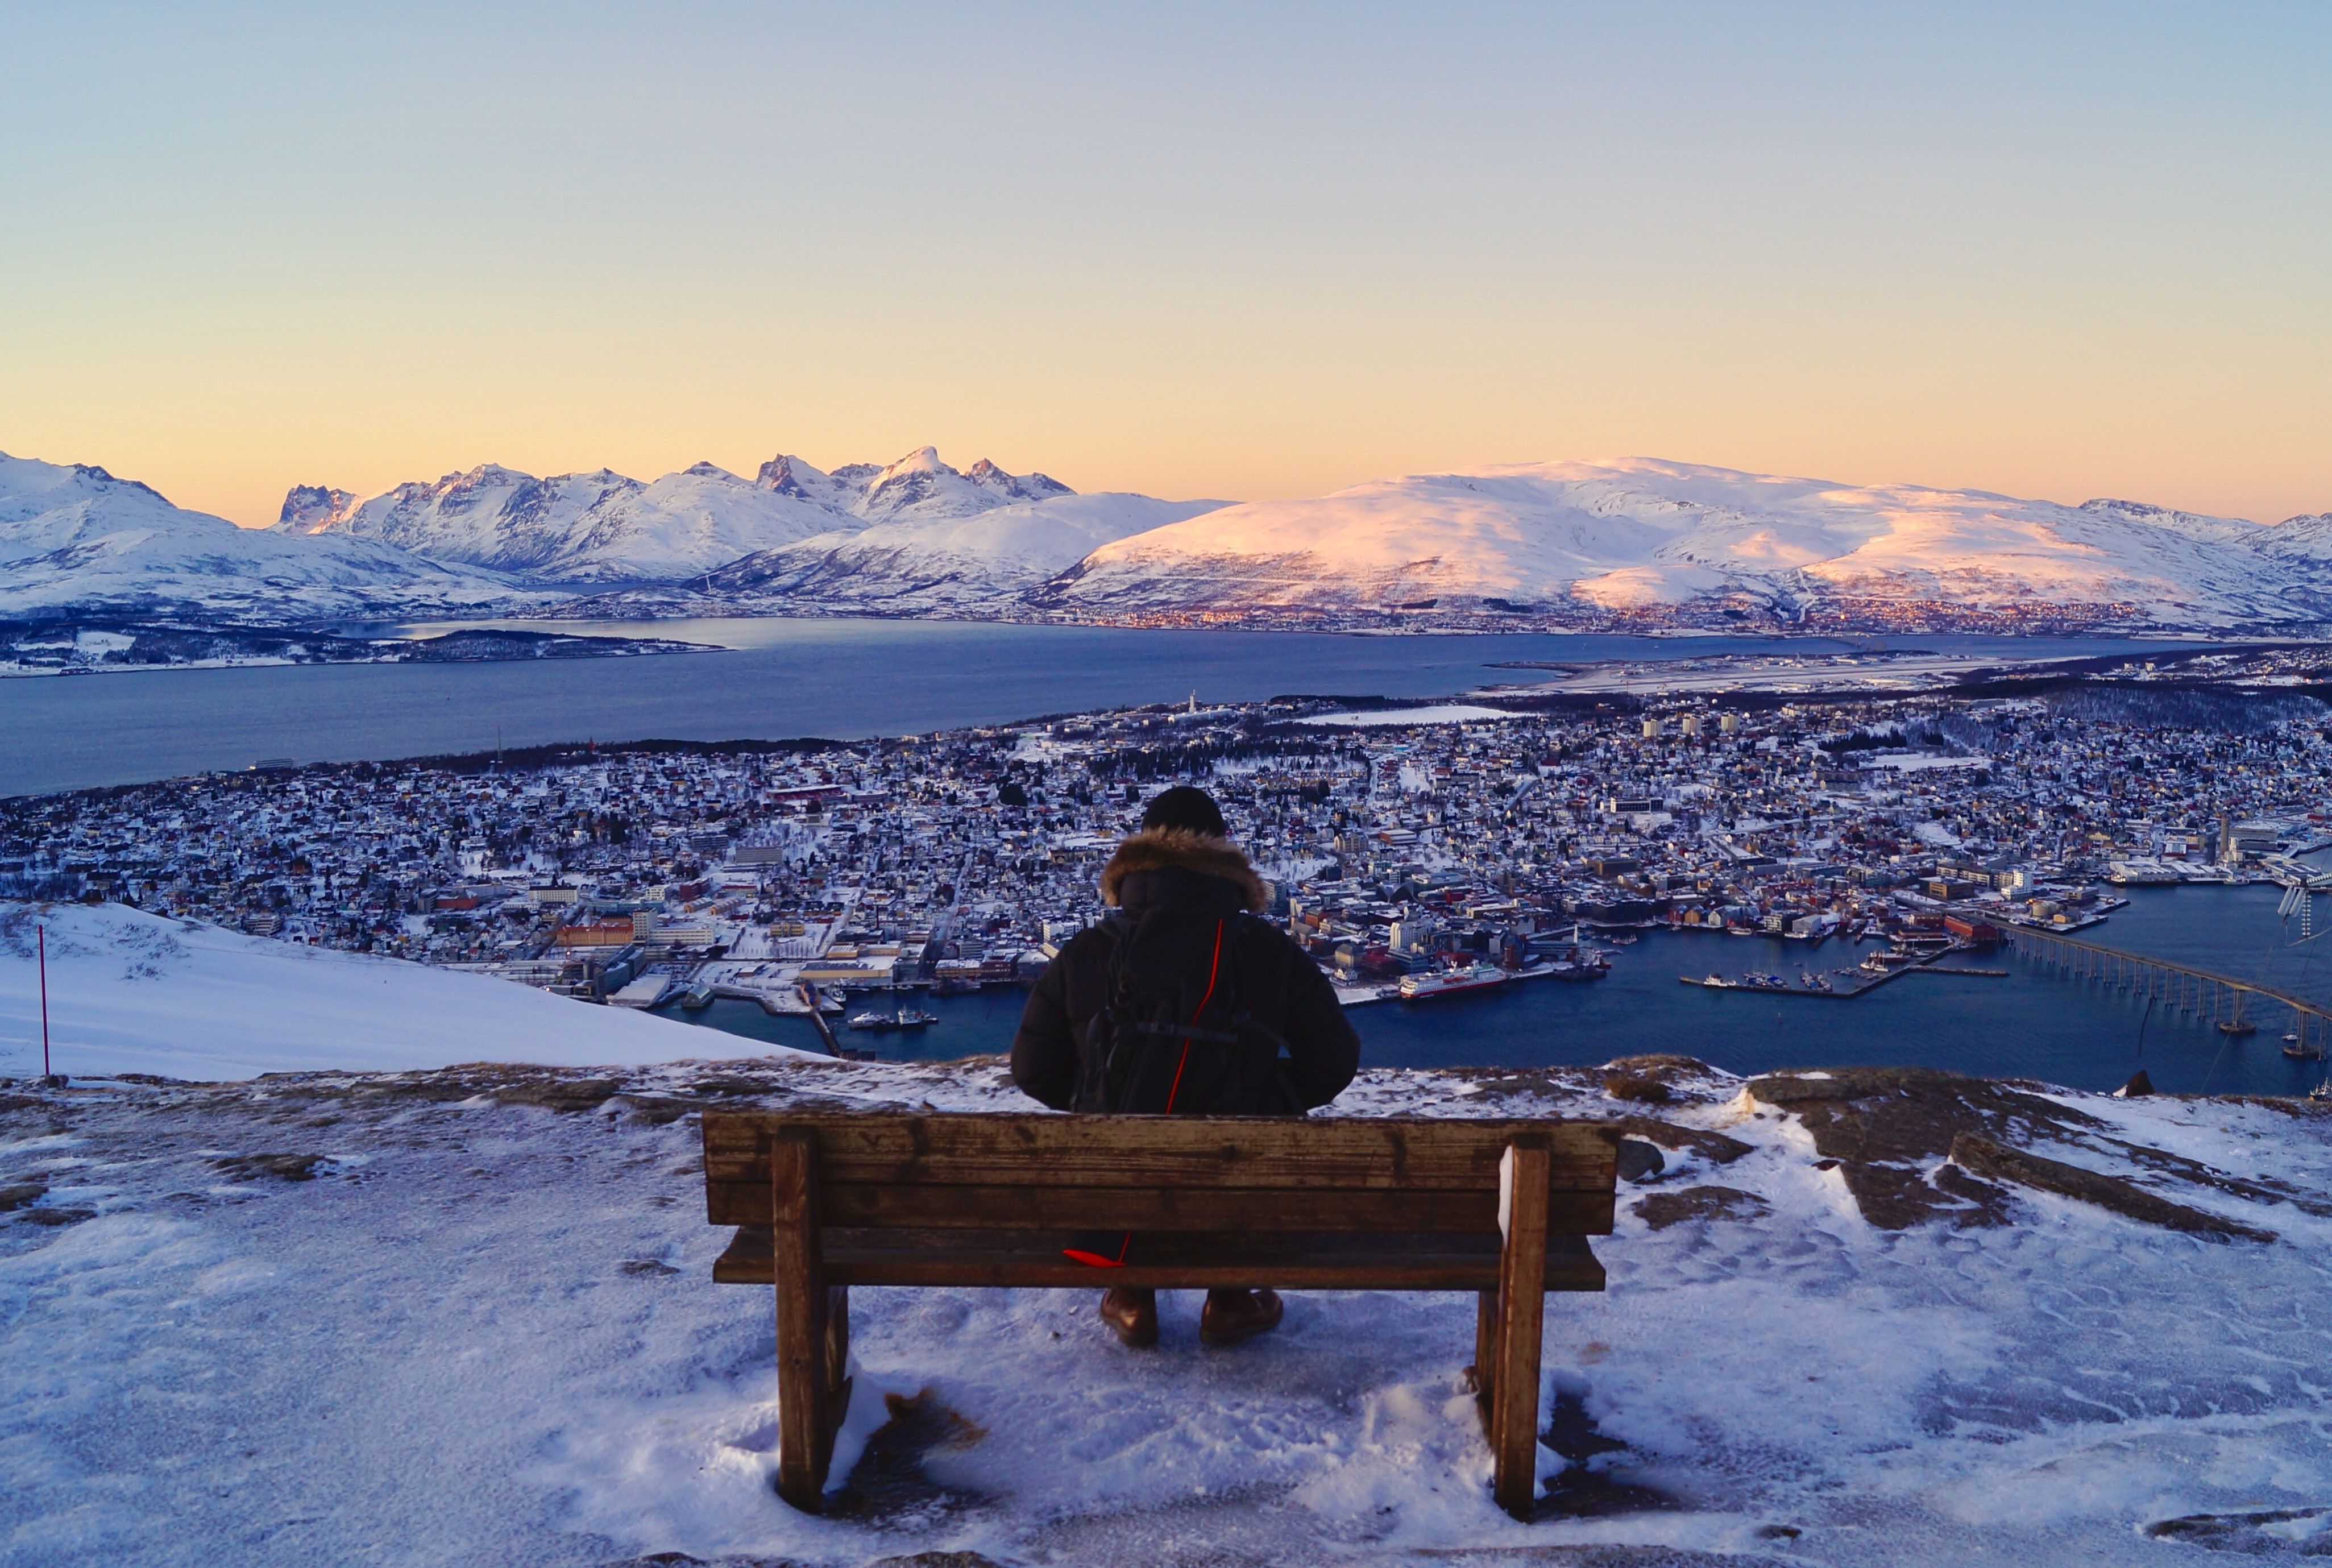 photo of a person sitting on a mountain overlooking a city